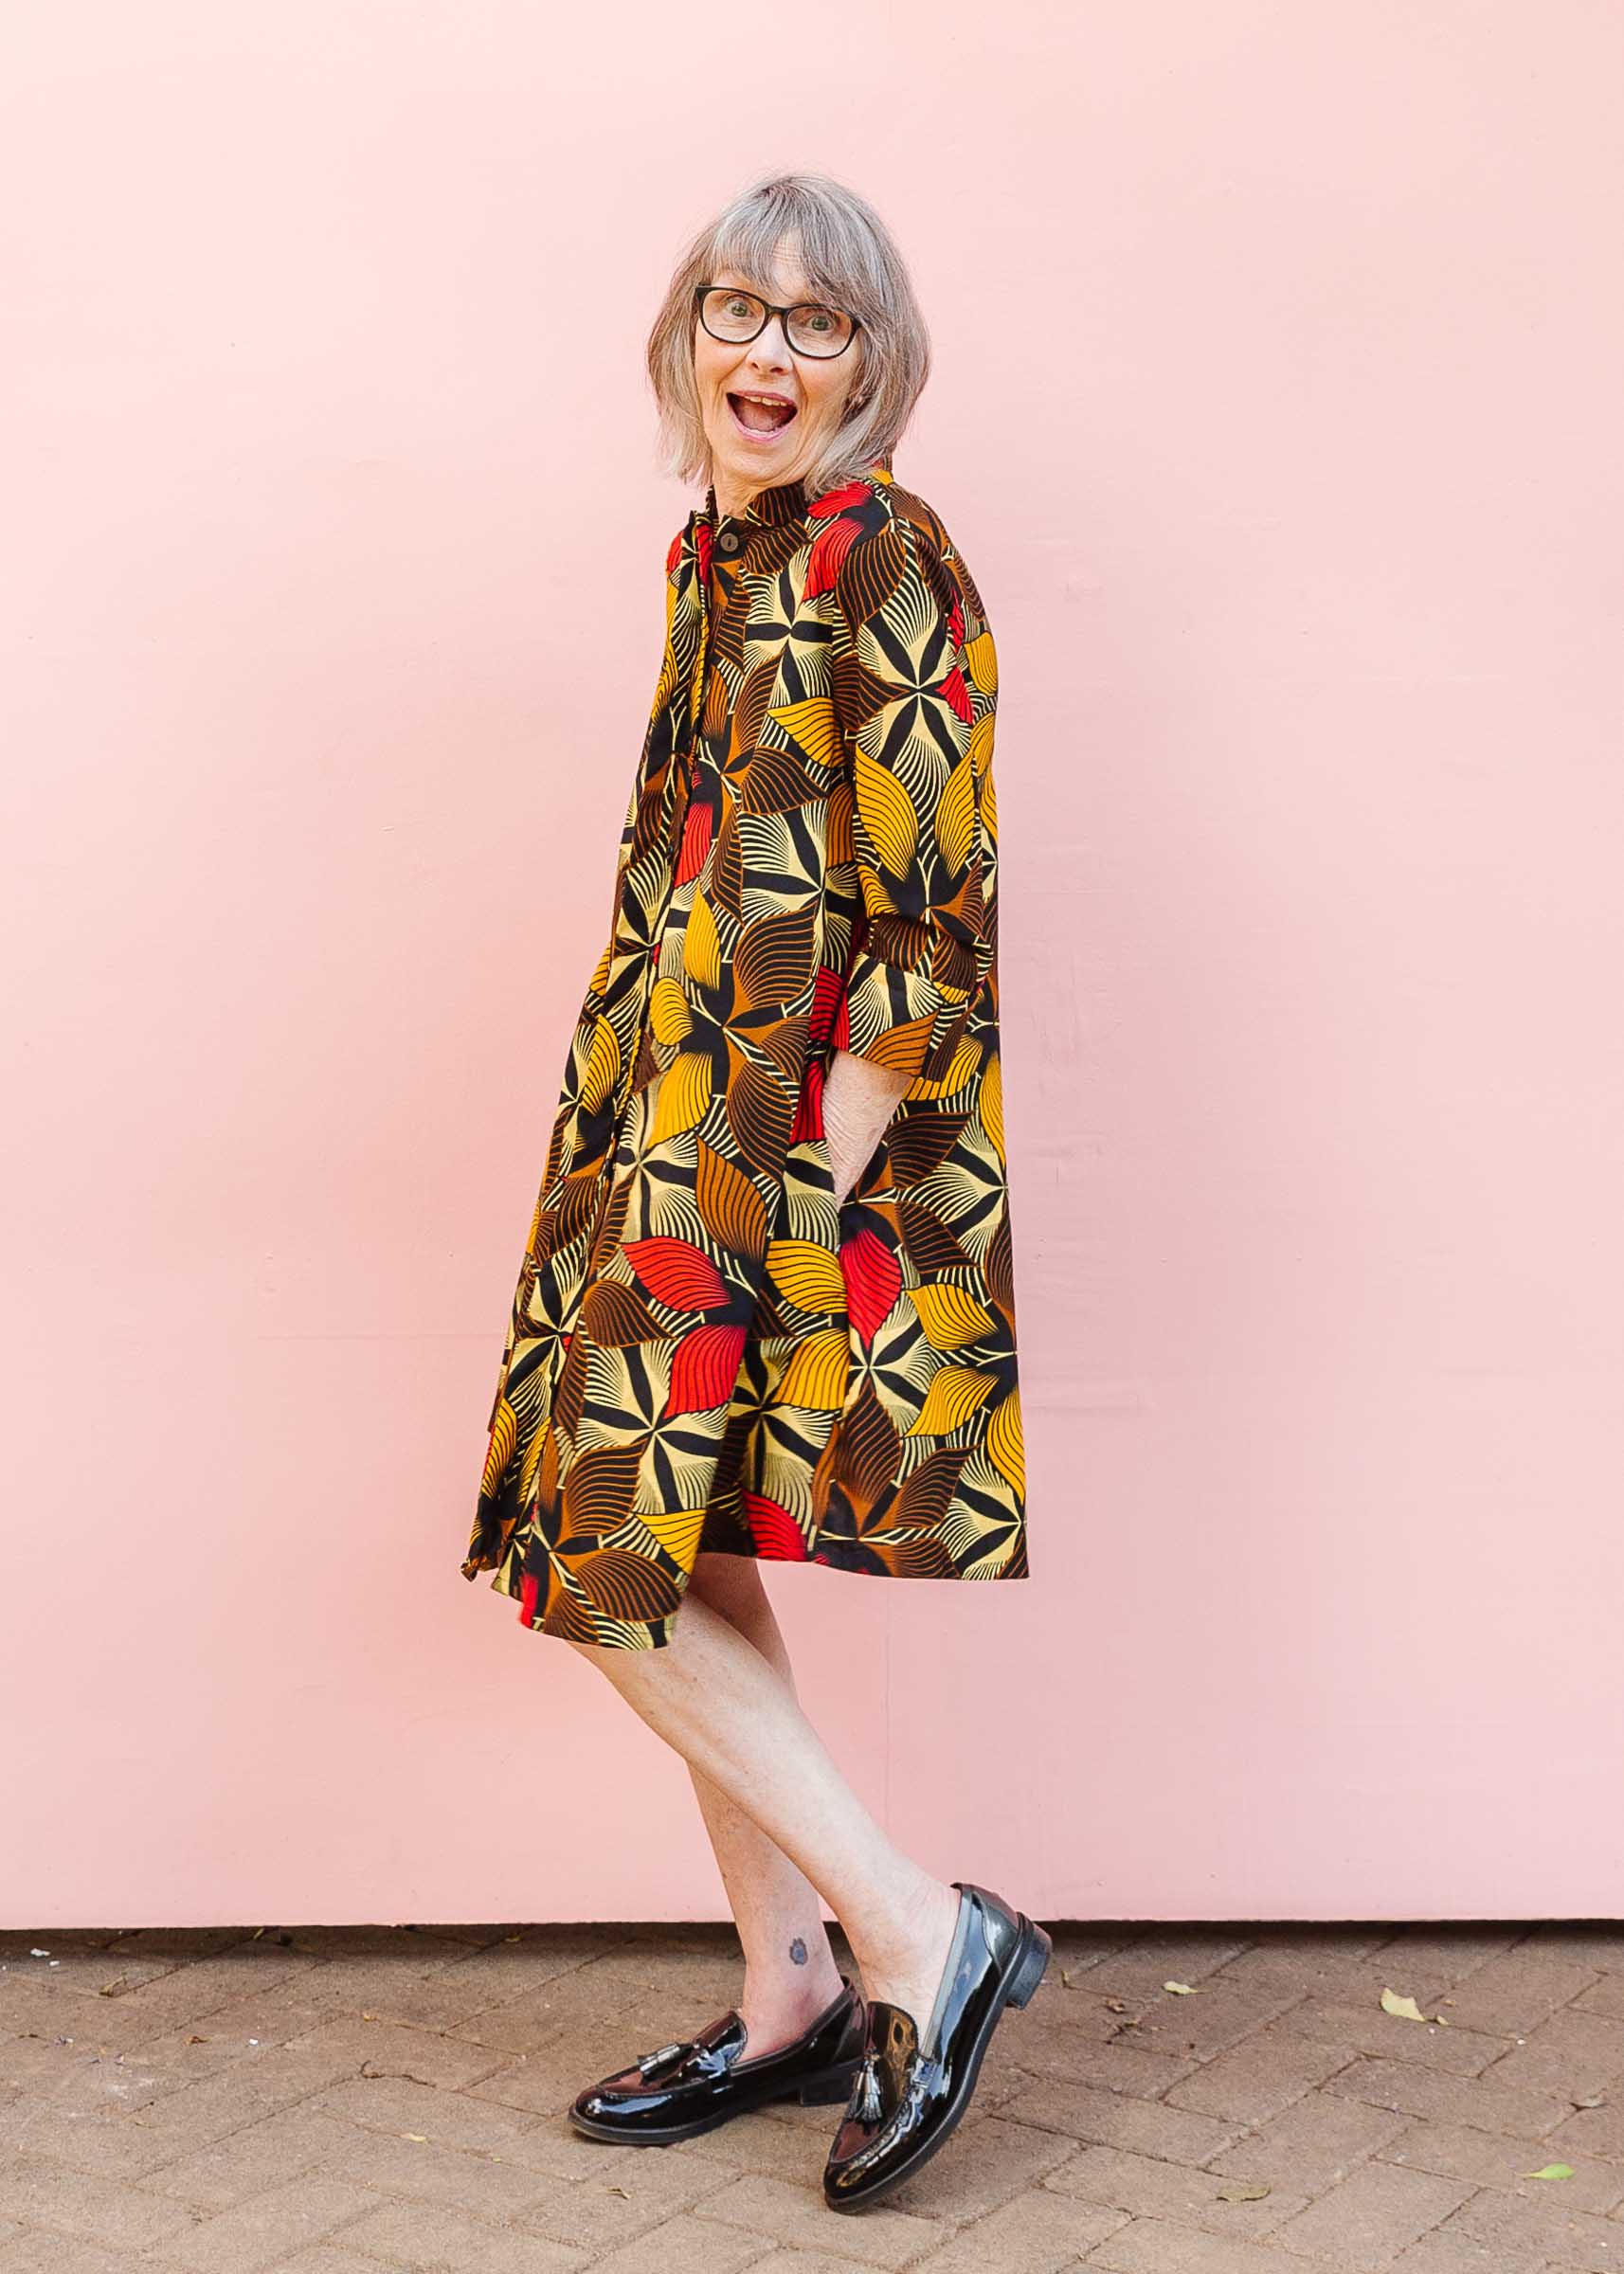 The model is wearing brown, yellow, red and black leaf print dress.